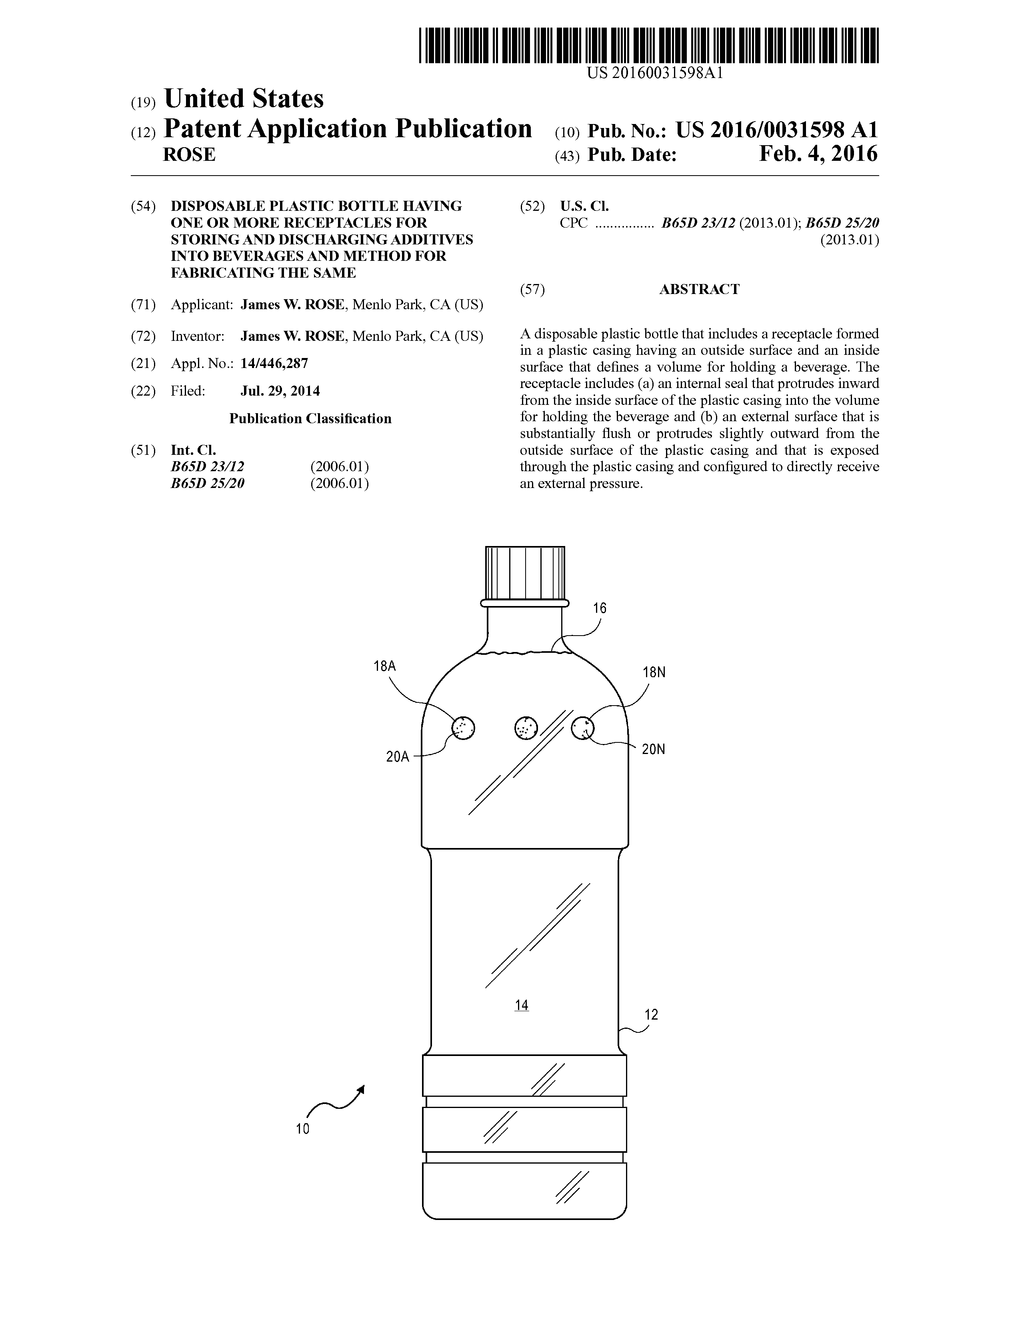 DISPOSABLE PLASTIC BOTTLE HAVING ONE OR MORE RECEPTACLES FOR STORING AND     DISCHARGING ADDITIVES INTO BEVERAGES AND METHOD FOR FABRICATING THE SAME - diagram, schematic, and image 01